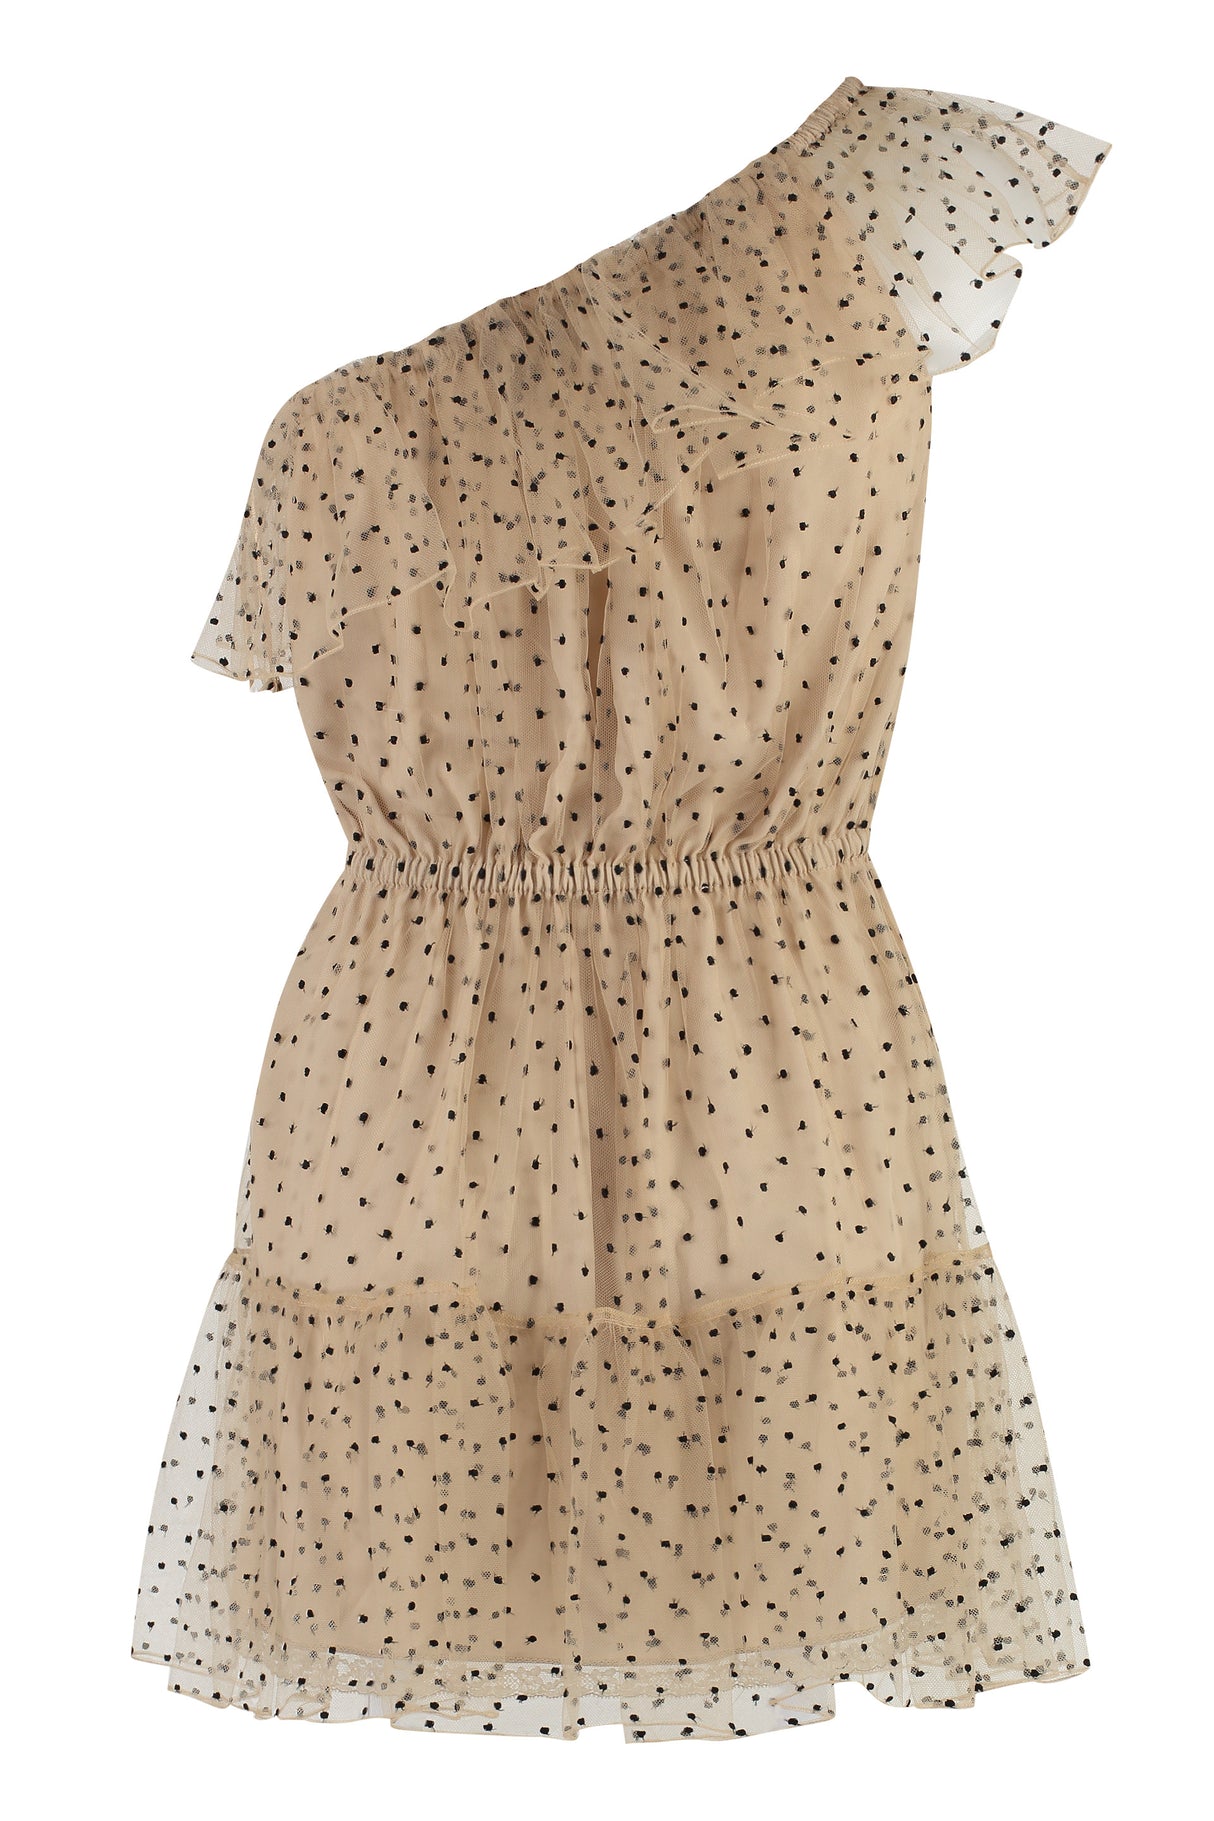 GUCCI Elegant Beige Polka Dot Tulle Dress for Women - SS23 Collection